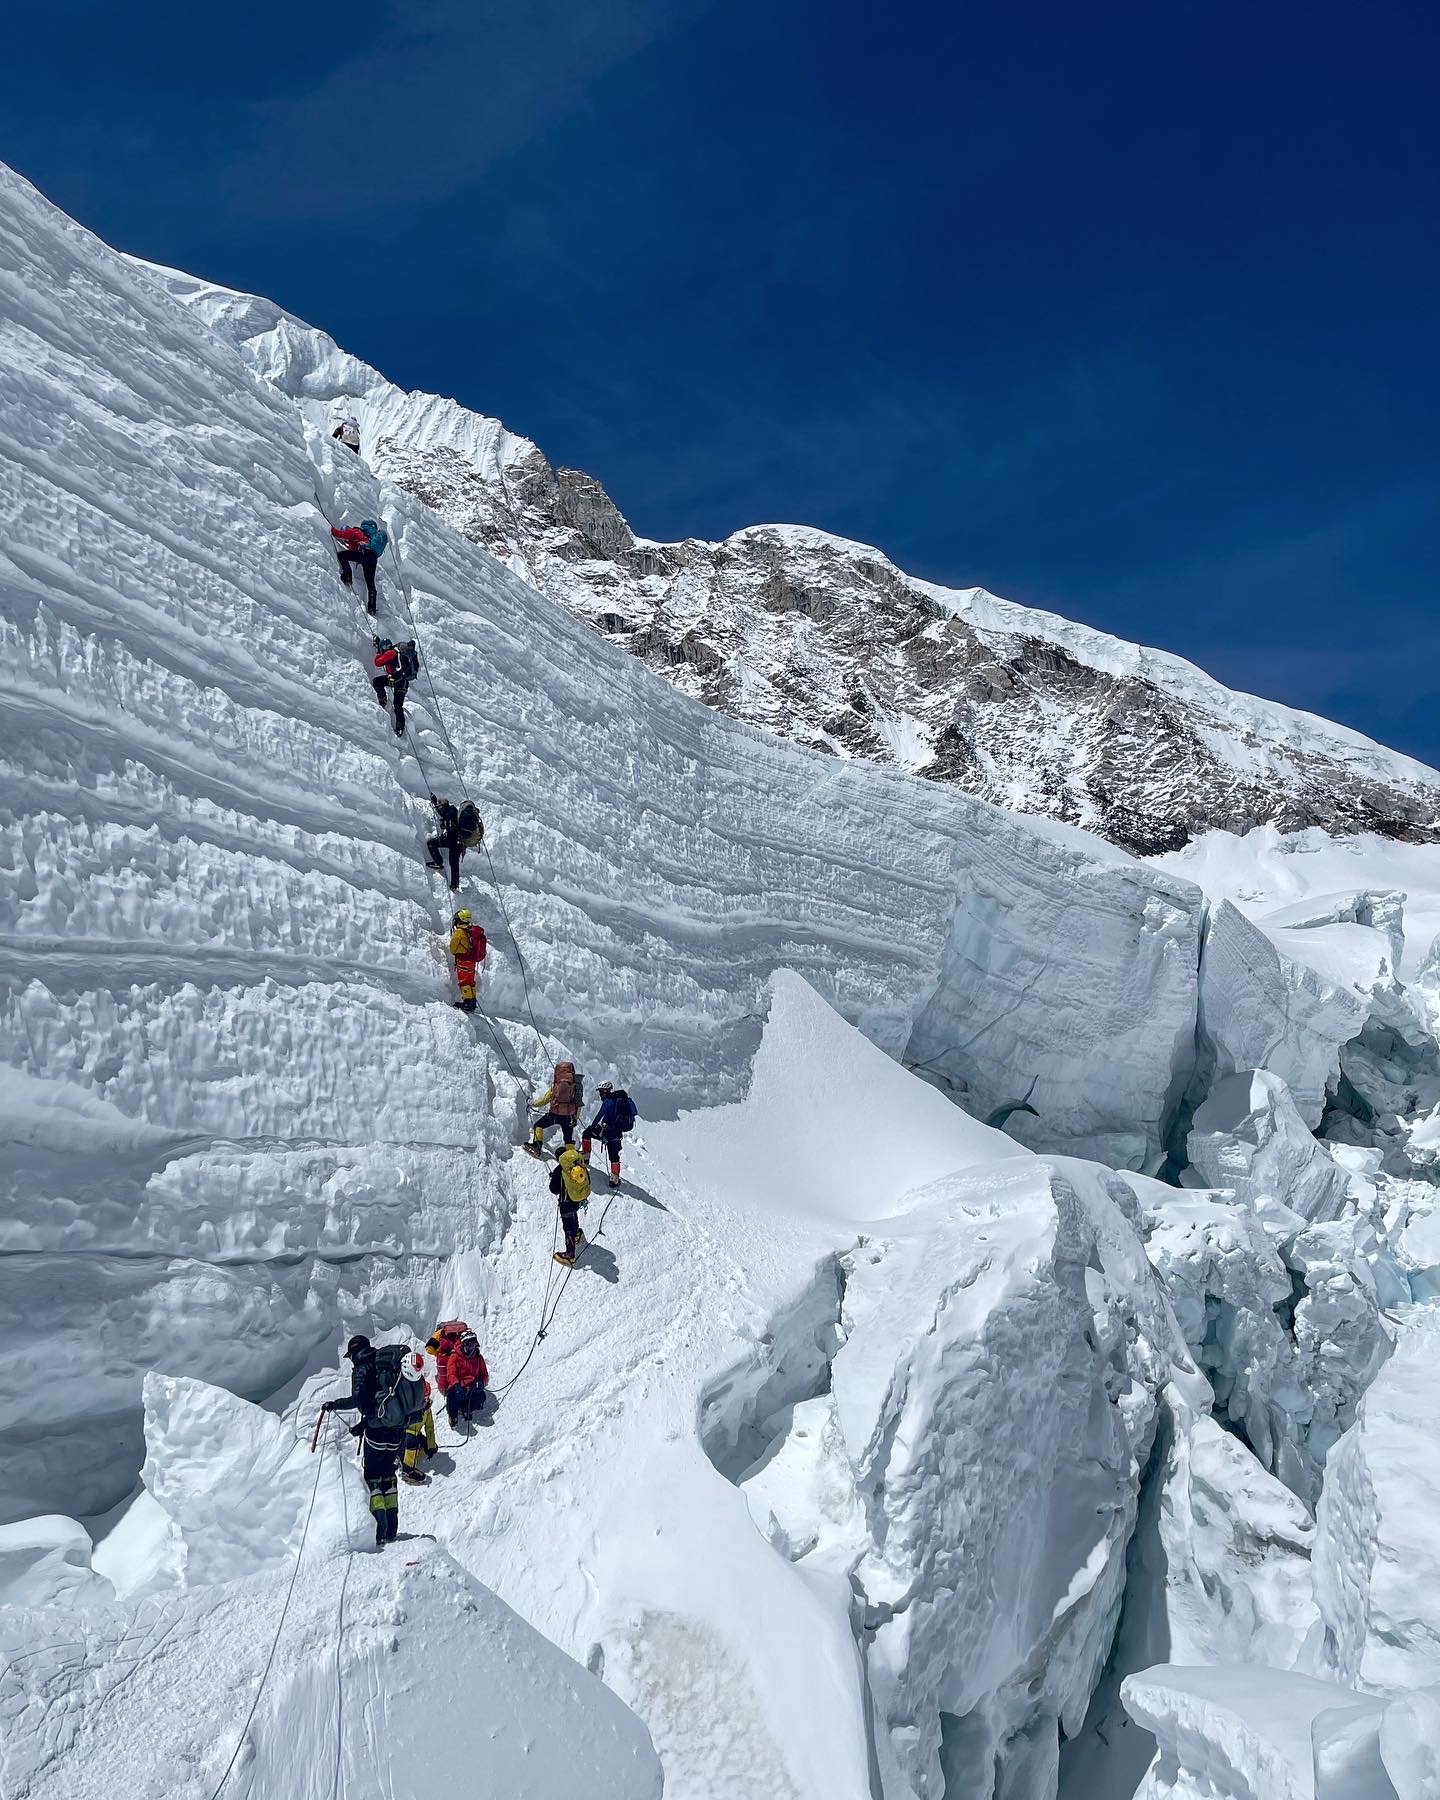 A group of mountaineers are climbing up a steep, snowy mountainside near Mount Everest. There are around 10 people waiting in line to climb up the rope and to the top of the mountain.